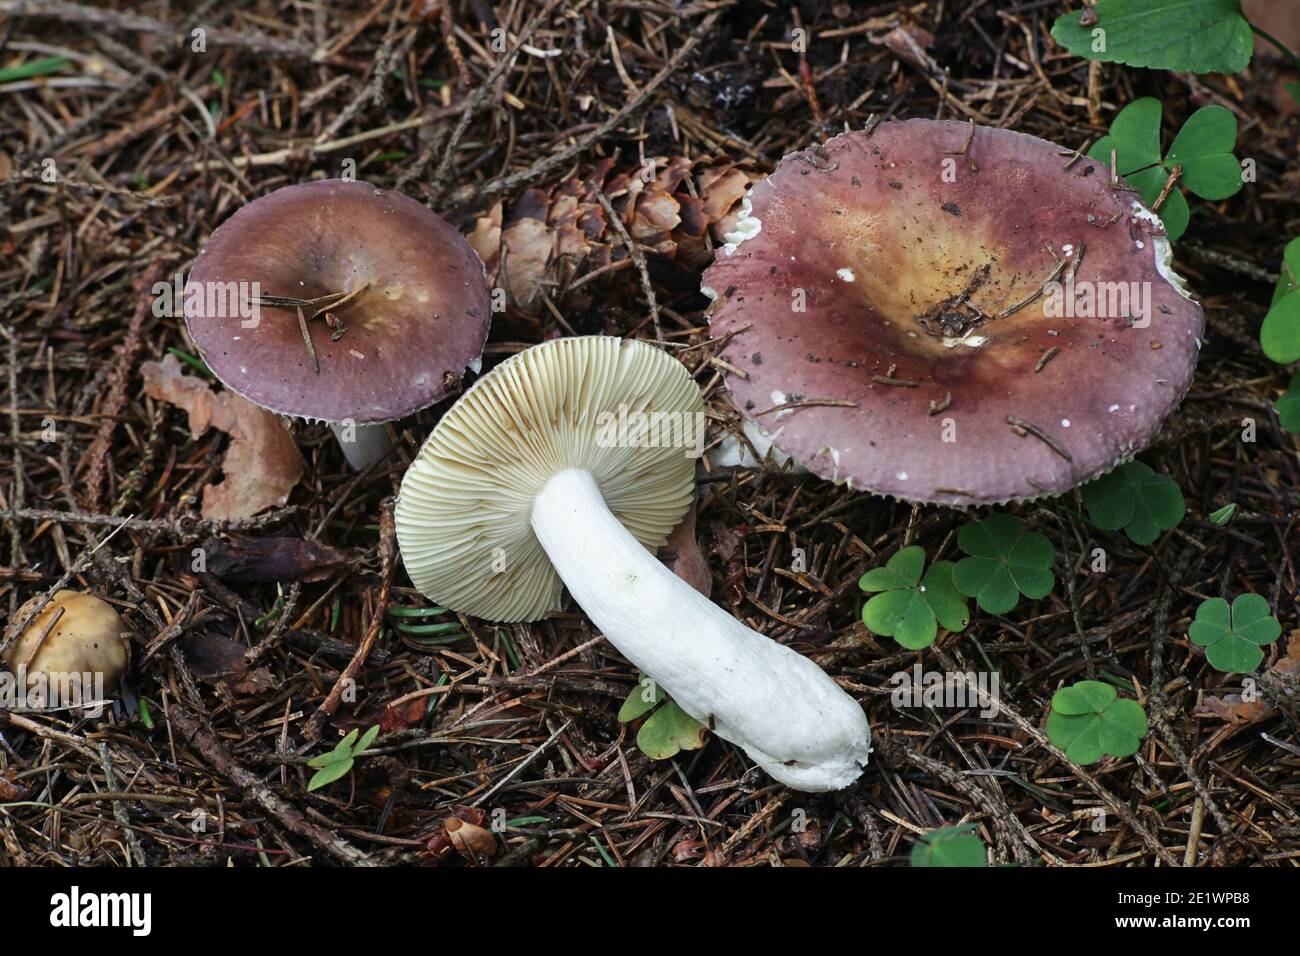 Russula integra, commonly known as the nutty brittlegill or entire russula, wild edible mushroom from Finland Stock Photo